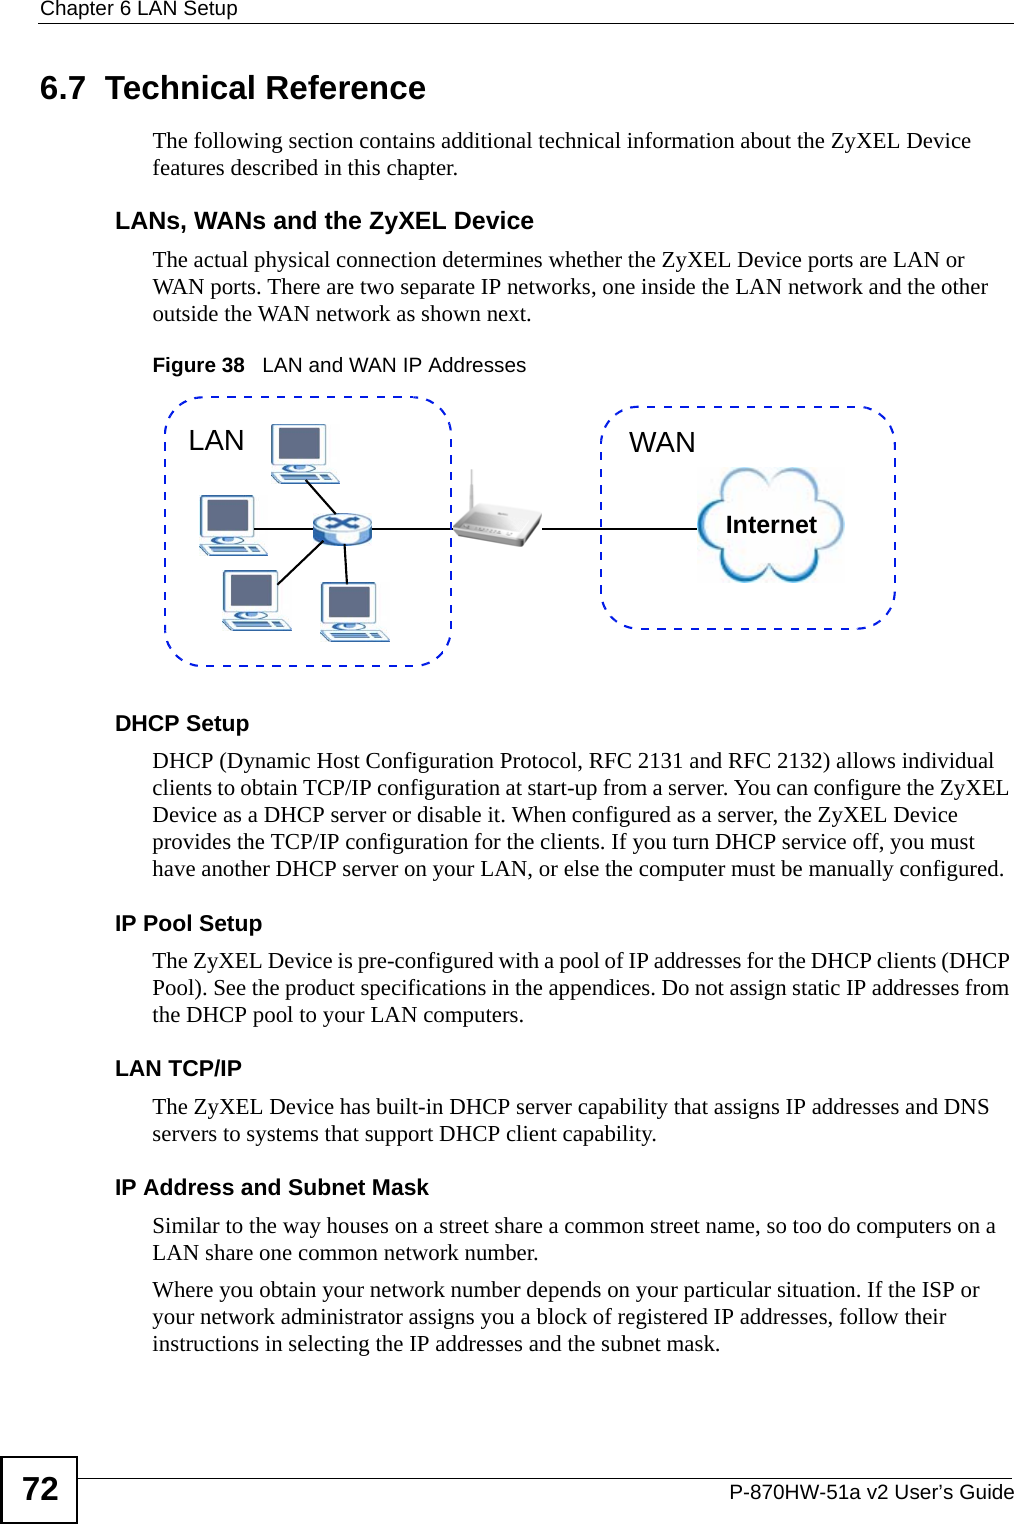 Chapter 6 LAN SetupP-870HW-51a v2 User’s Guide726.7  Technical ReferenceThe following section contains additional technical information about the ZyXEL Device features described in this chapter.LANs, WANs and the ZyXEL DeviceThe actual physical connection determines whether the ZyXEL Device ports are LAN or WAN ports. There are two separate IP networks, one inside the LAN network and the other outside the WAN network as shown next.Figure 38   LAN and WAN IP AddressesDHCP SetupDHCP (Dynamic Host Configuration Protocol, RFC 2131 and RFC 2132) allows individual clients to obtain TCP/IP configuration at start-up from a server. You can configure the ZyXEL Device as a DHCP server or disable it. When configured as a server, the ZyXEL Device provides the TCP/IP configuration for the clients. If you turn DHCP service off, you must have another DHCP server on your LAN, or else the computer must be manually configured. IP Pool SetupThe ZyXEL Device is pre-configured with a pool of IP addresses for the DHCP clients (DHCP Pool). See the product specifications in the appendices. Do not assign static IP addresses from the DHCP pool to your LAN computers.LAN TCP/IP The ZyXEL Device has built-in DHCP server capability that assigns IP addresses and DNS servers to systems that support DHCP client capability.IP Address and Subnet MaskSimilar to the way houses on a street share a common street name, so too do computers on a LAN share one common network number.Where you obtain your network number depends on your particular situation. If the ISP or your network administrator assigns you a block of registered IP addresses, follow their instructions in selecting the IP addresses and the subnet mask.InternetWANLAN